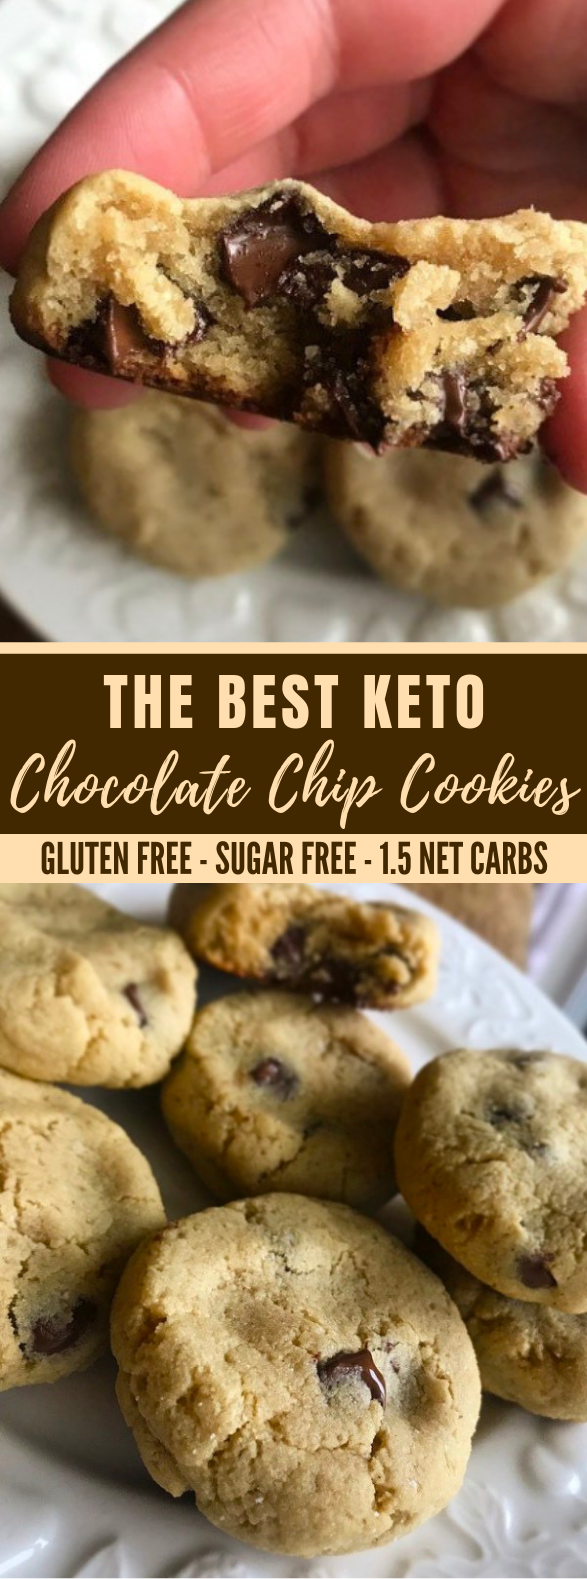 CHEWY KETO CHOCOLATE-CHIP COOKIES #ketogenicdiet #lowcarb